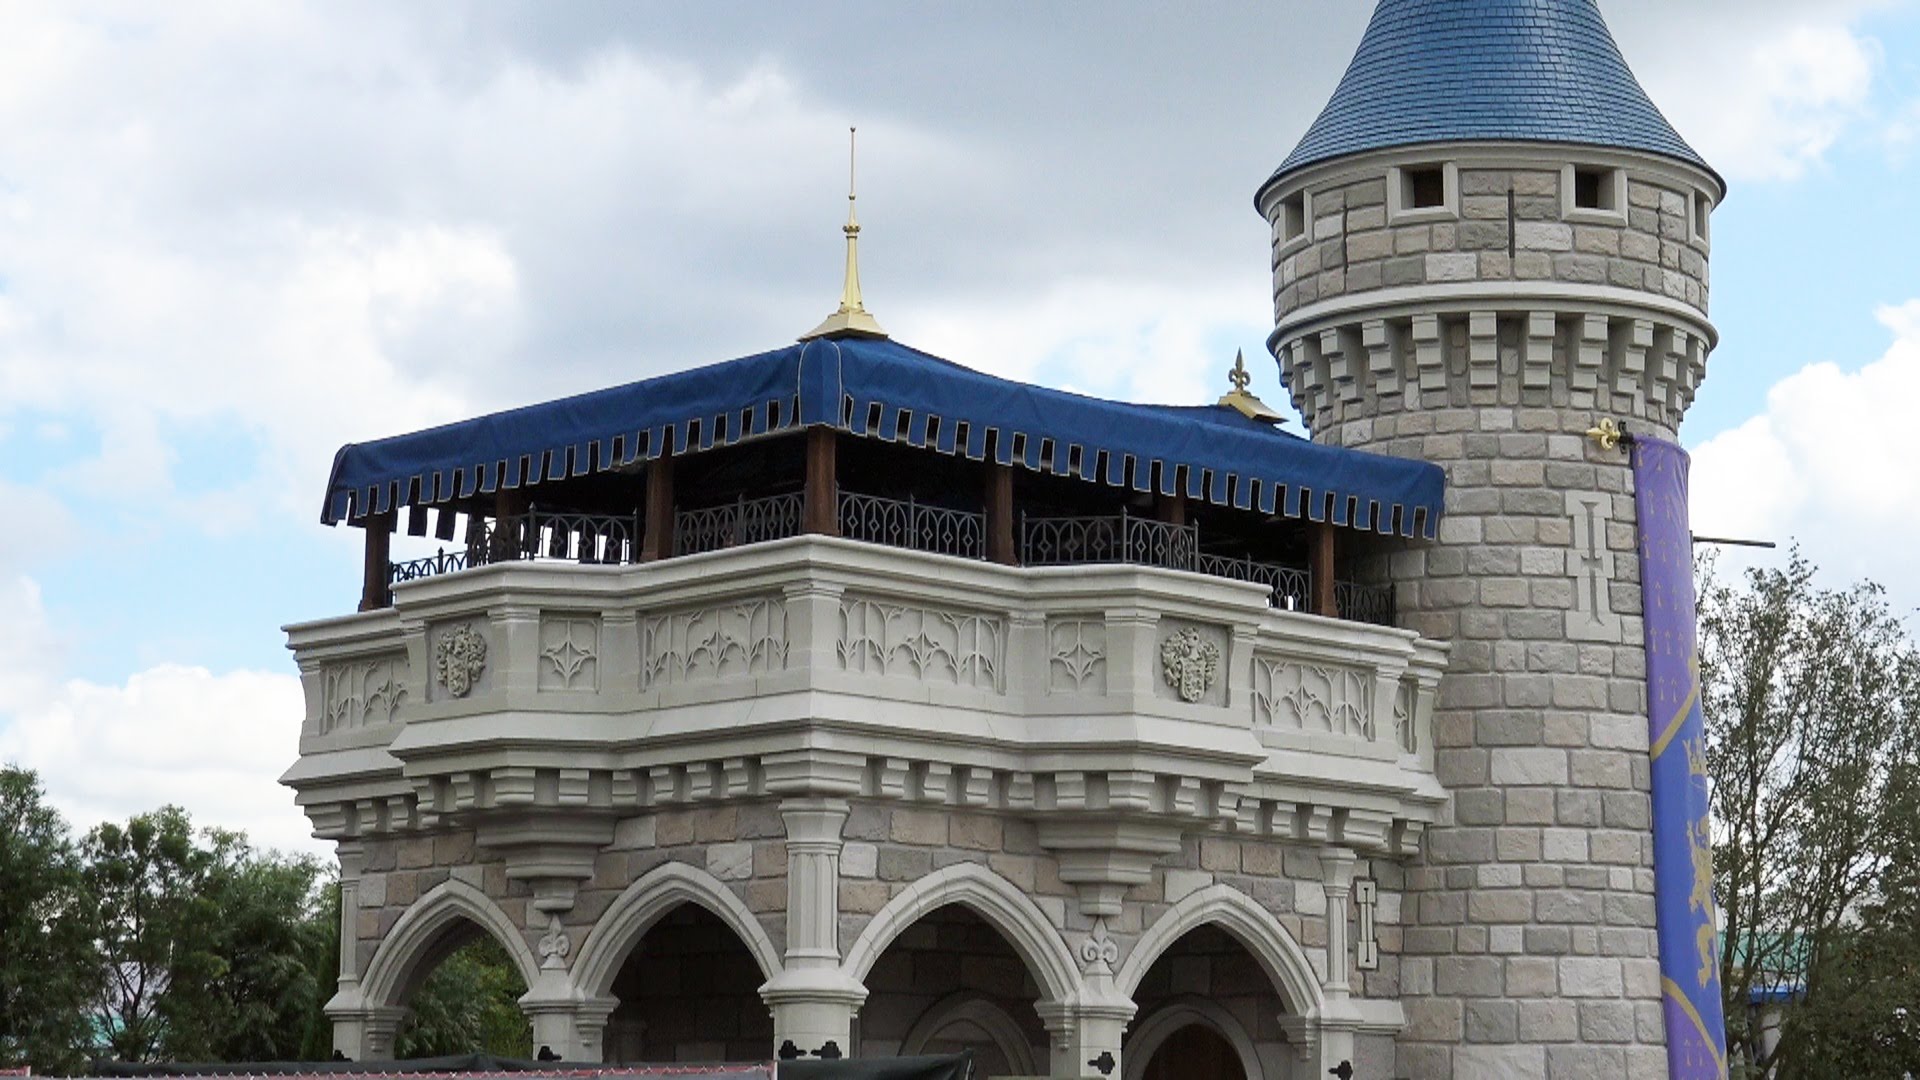 Castle Construction Revealed - NEW Tower Turrets with Elegant ...